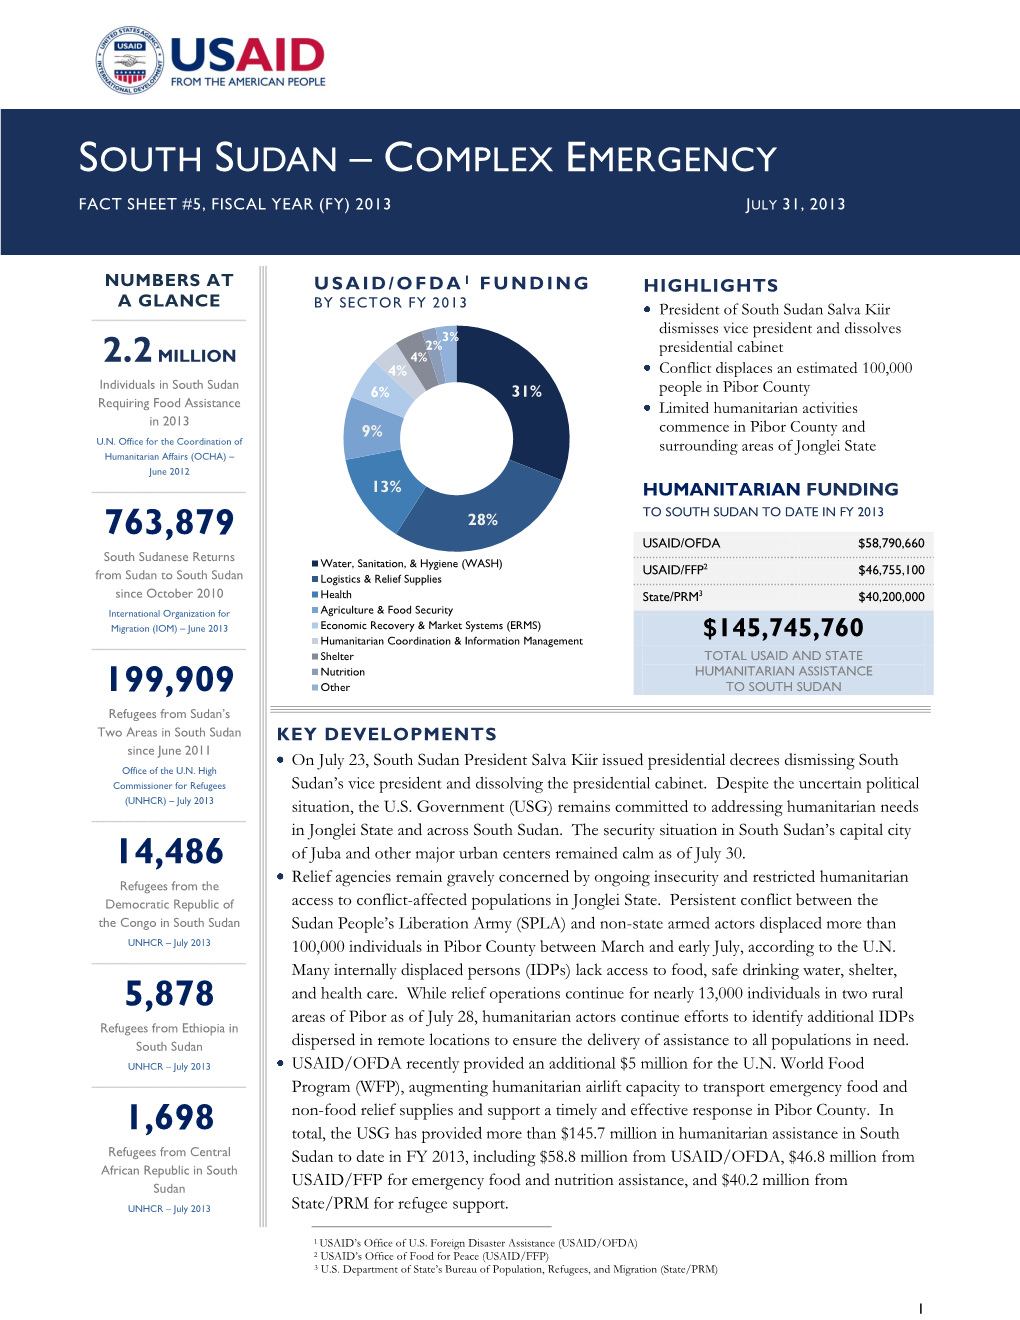 South Sudan – Complex Emergency Fact Sheet #5, Fiscal Year (Fy) 2013 July 31, 2013